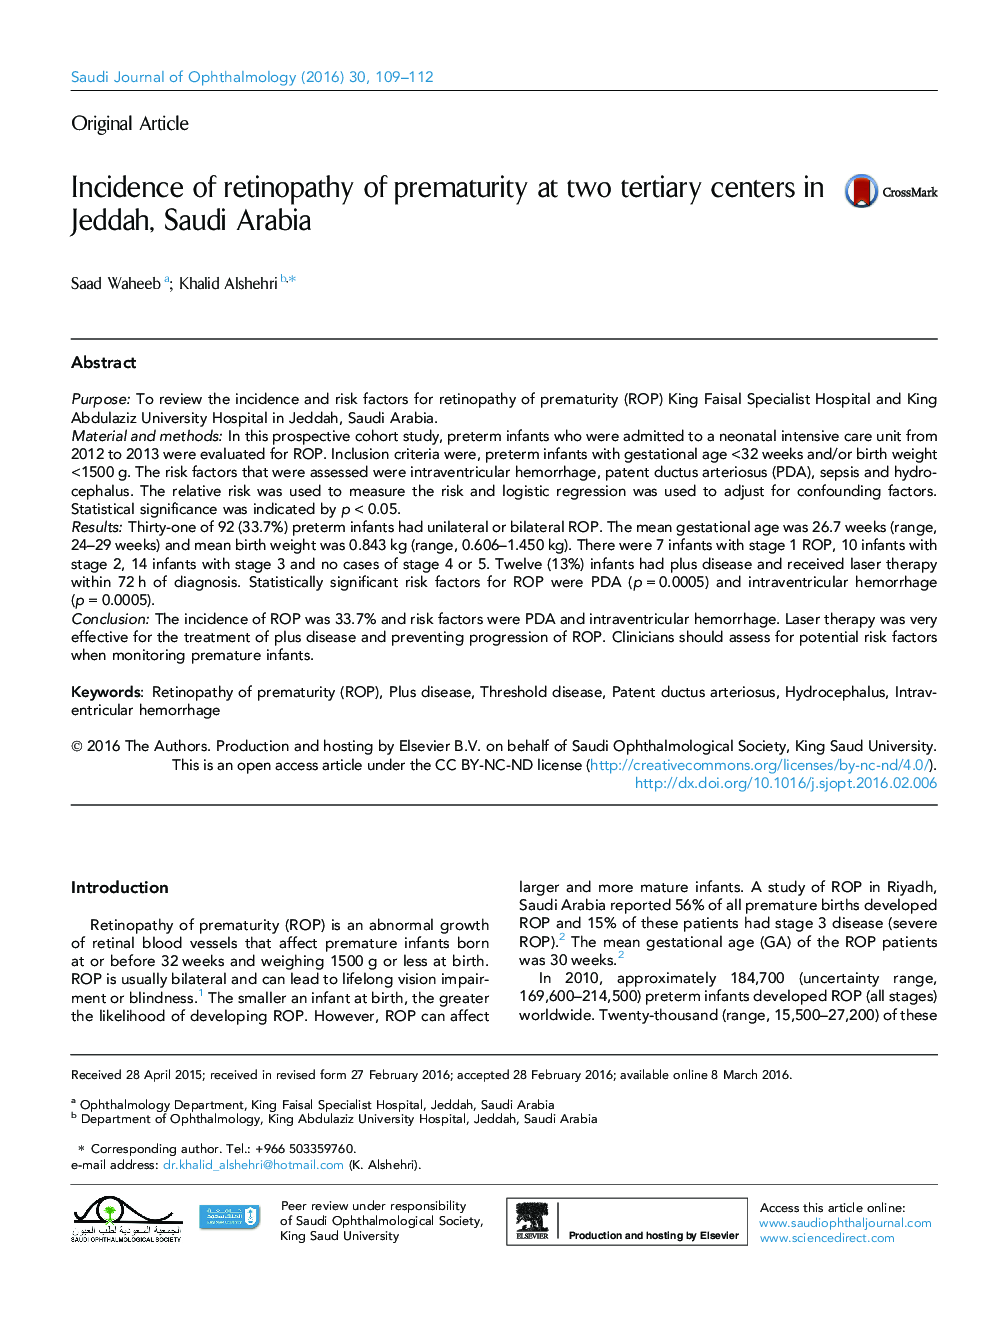 Incidence of retinopathy of prematurity at two tertiary centers in Jeddah, Saudi Arabia 